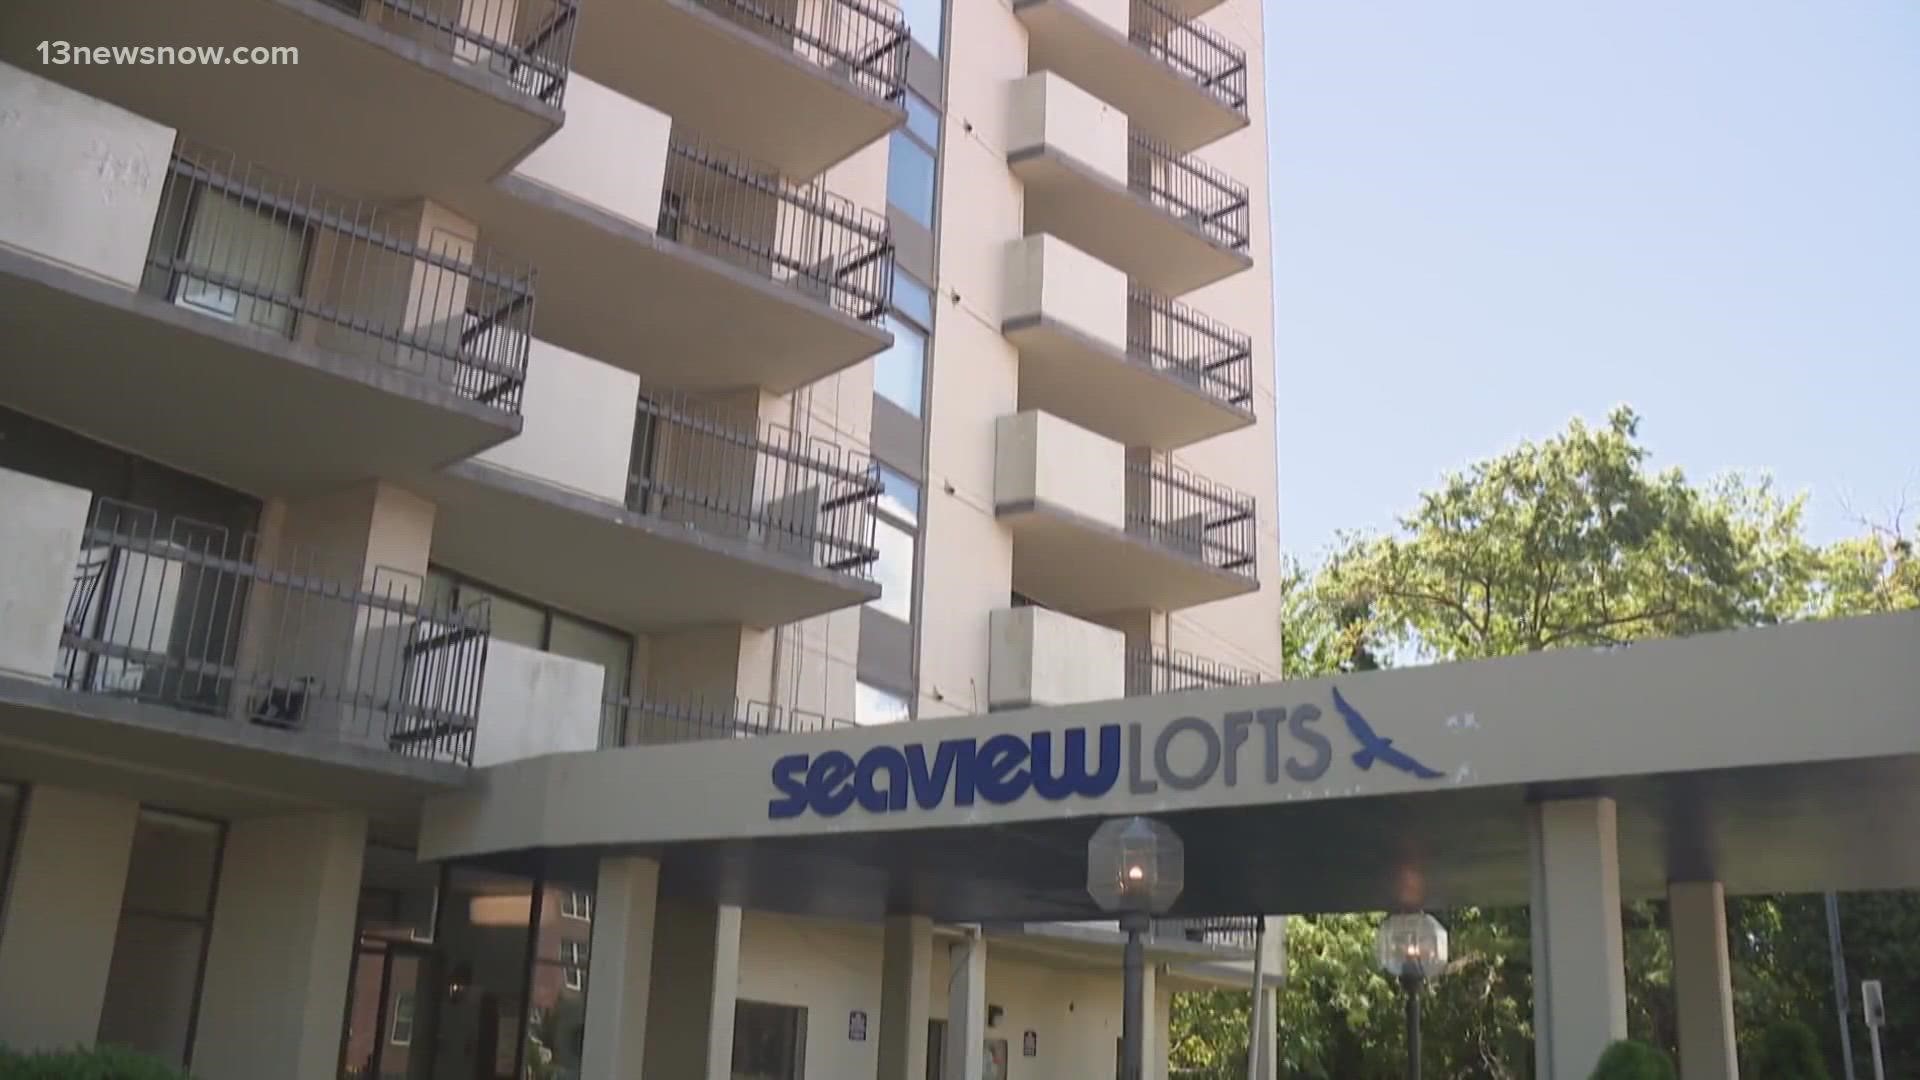 Two months ago, a judge condemned the SeaView Lofts apartments and forced residents to find a new place to live.